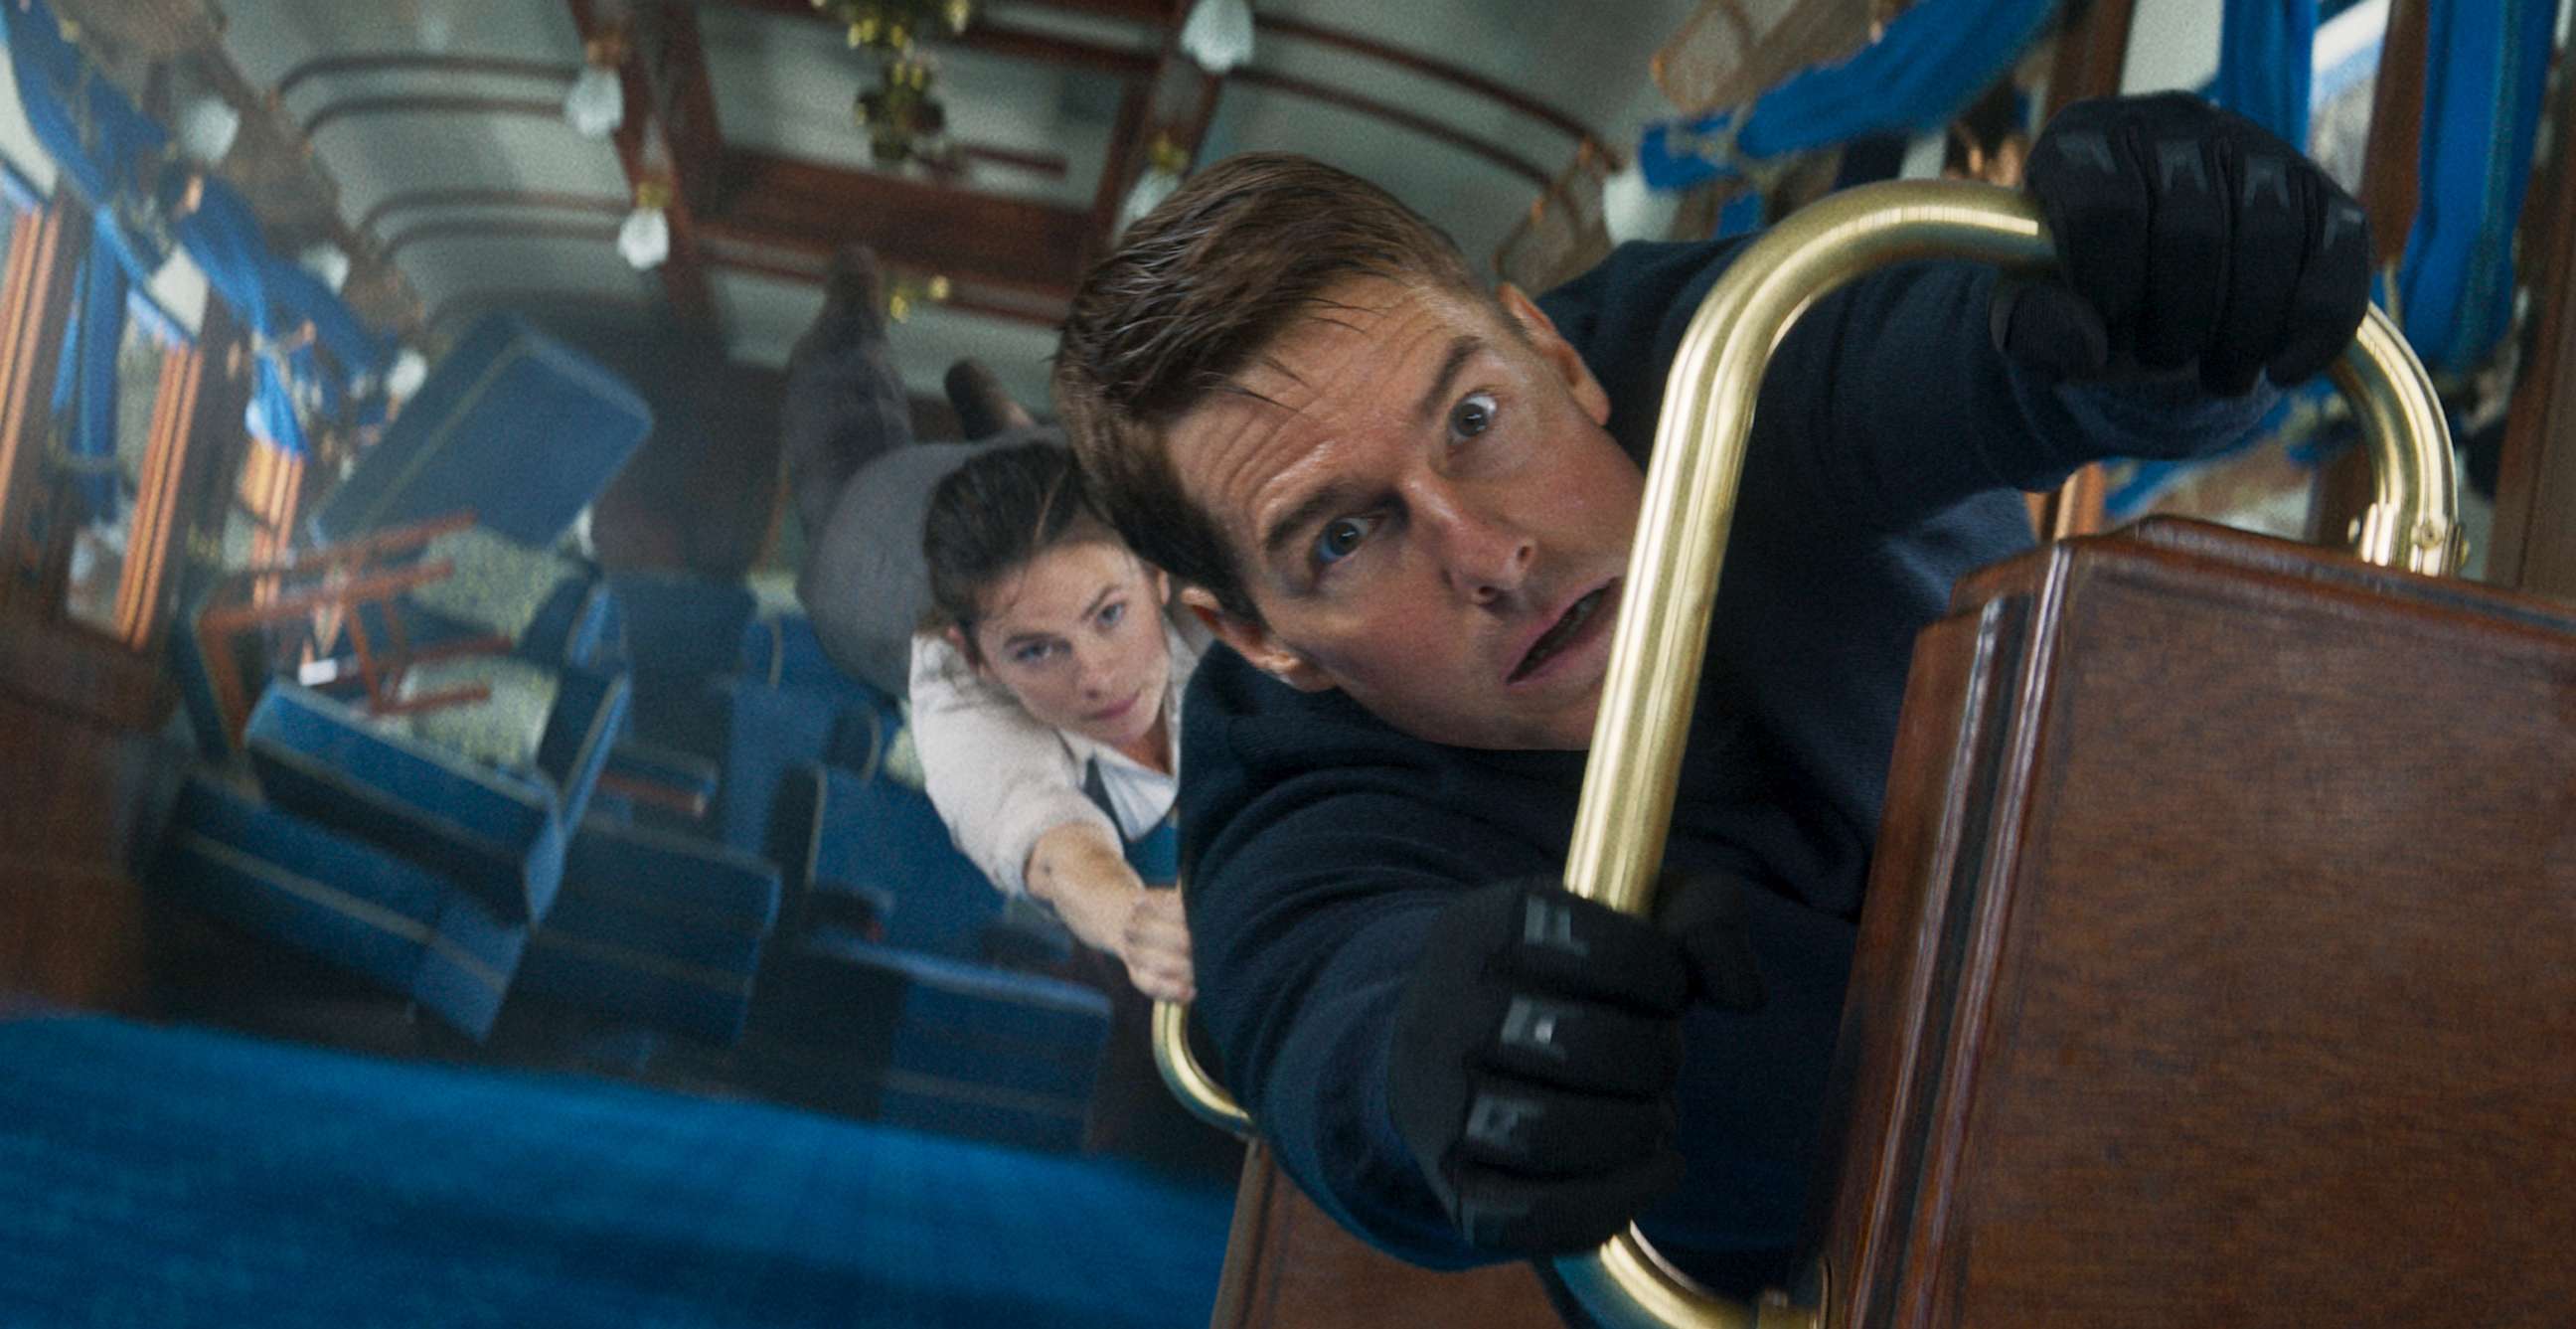 PHOTO: Tom Cruise and Hayley Atwell in a scene from the movie, "Mission: Impossible Dead Reckoning Part One," from Paramount Pictures and Skydance.